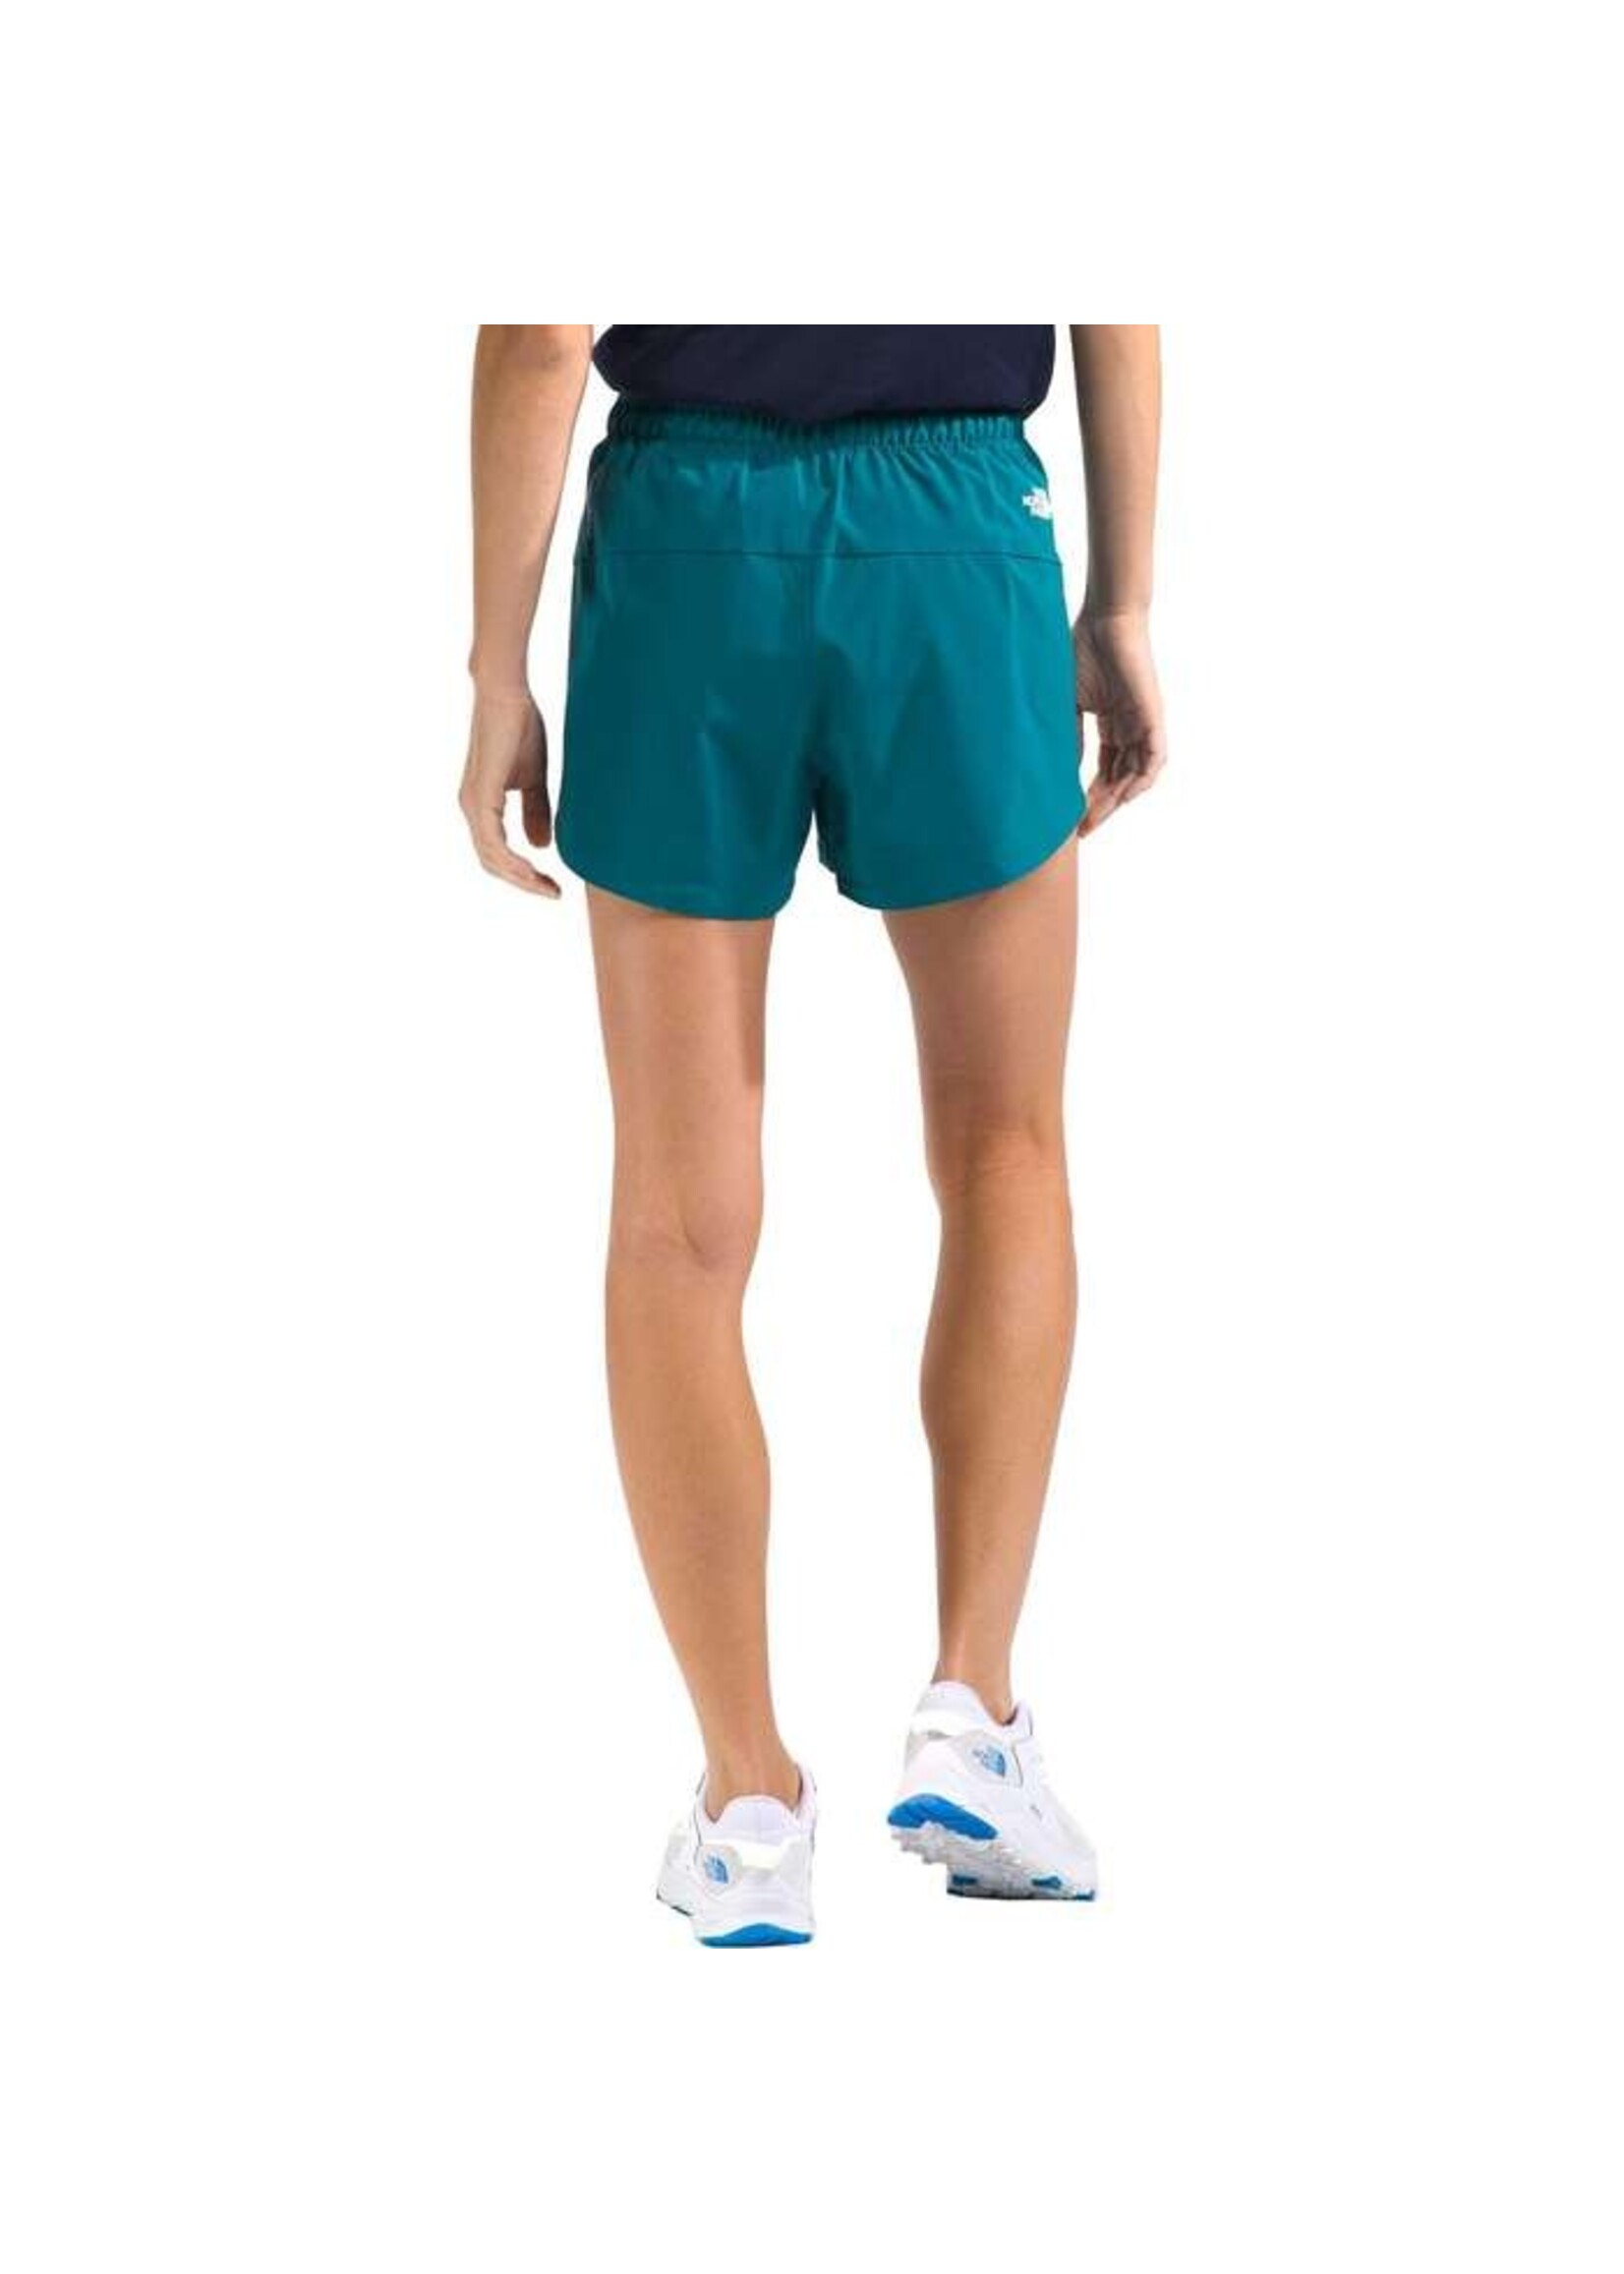 North Face North Face W's Wander Short 2.0